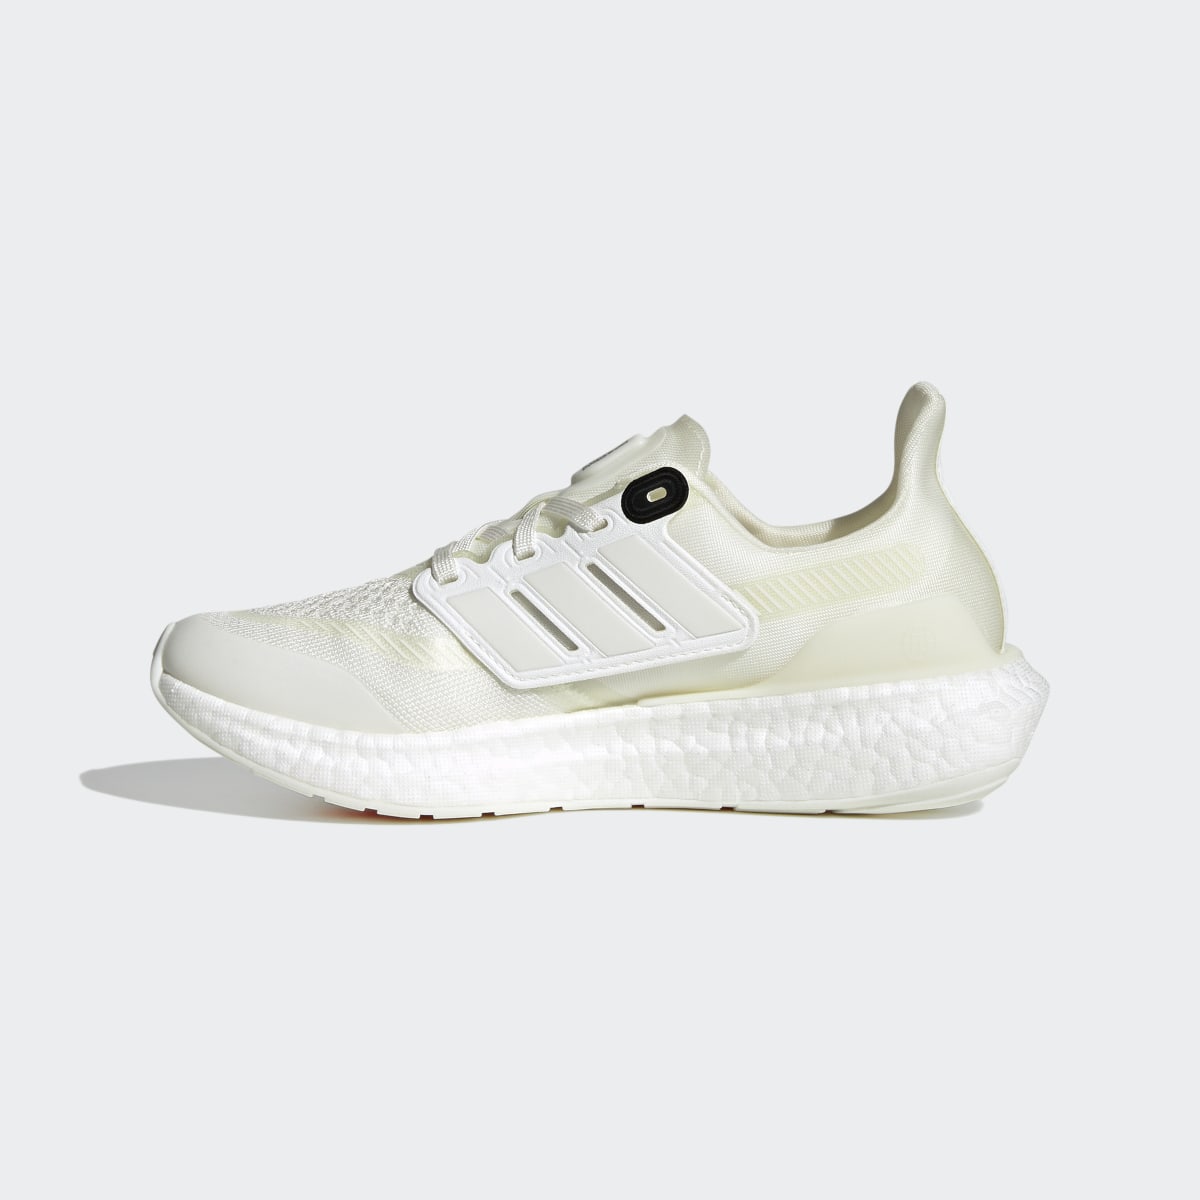 Adidas Ultraboost Made to be Remade 2.0 Laufschuh. 10